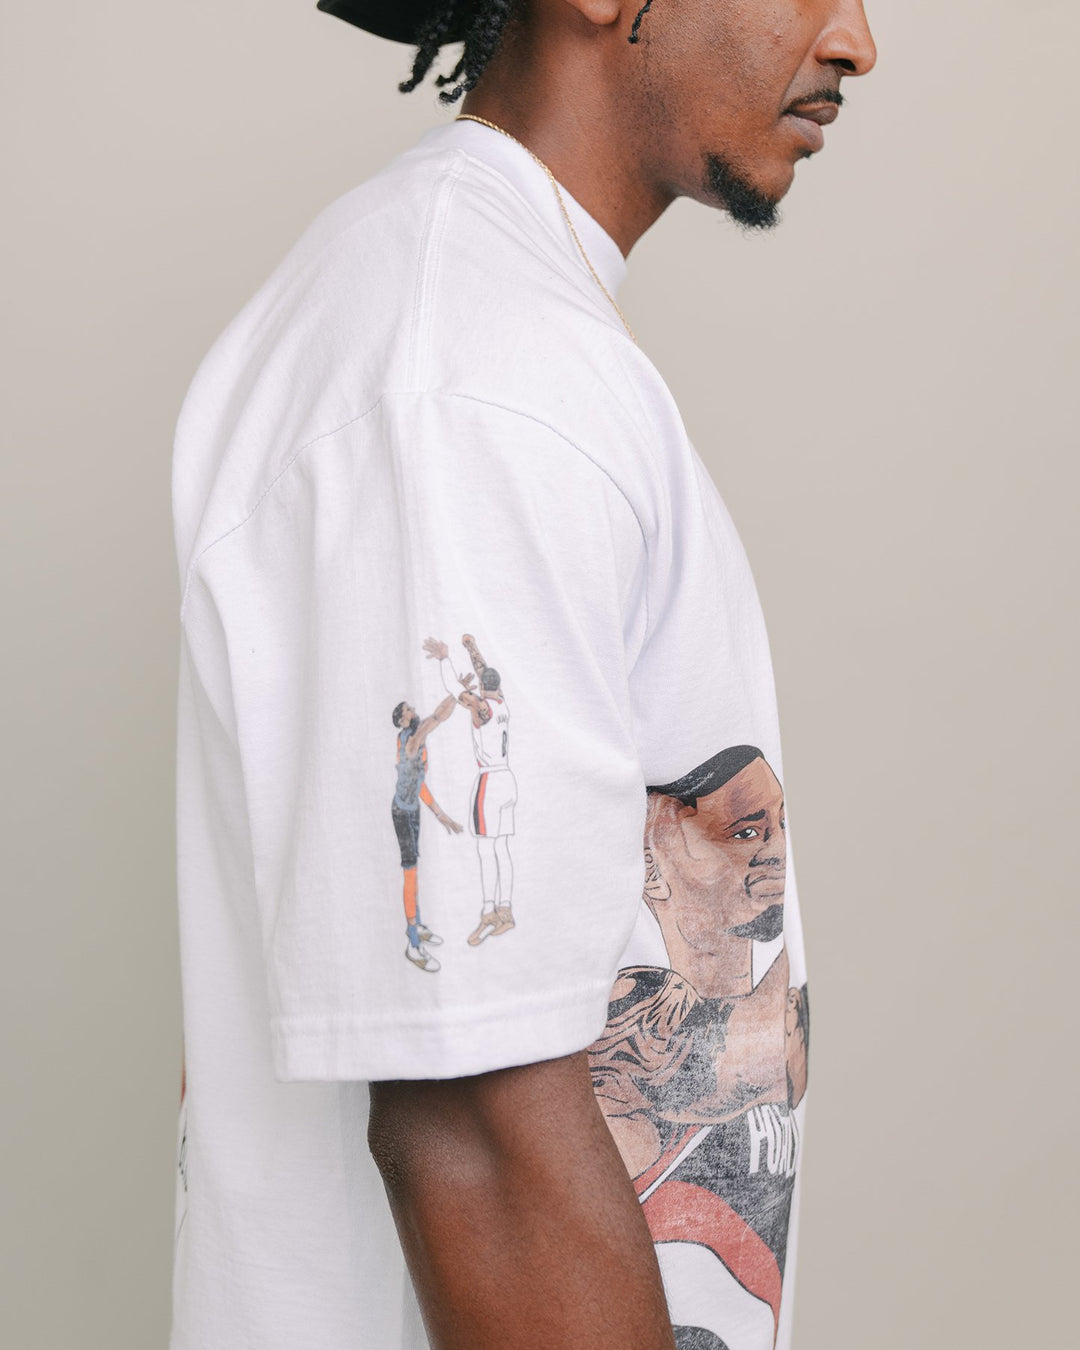 Dame Dolla White Tee *Collectors Edition* - trainofthoughtcollective